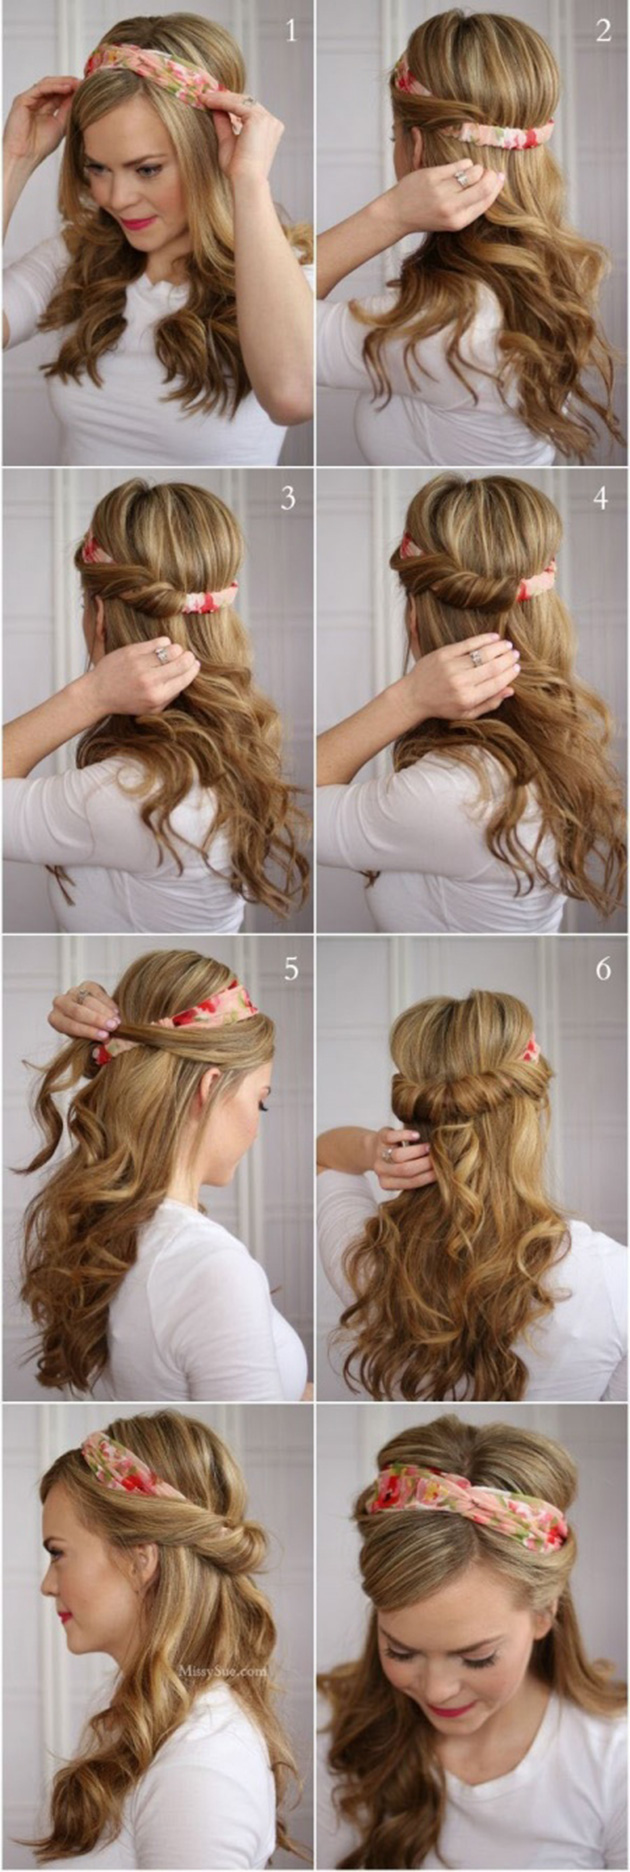 hairstyles-in-three-minutes